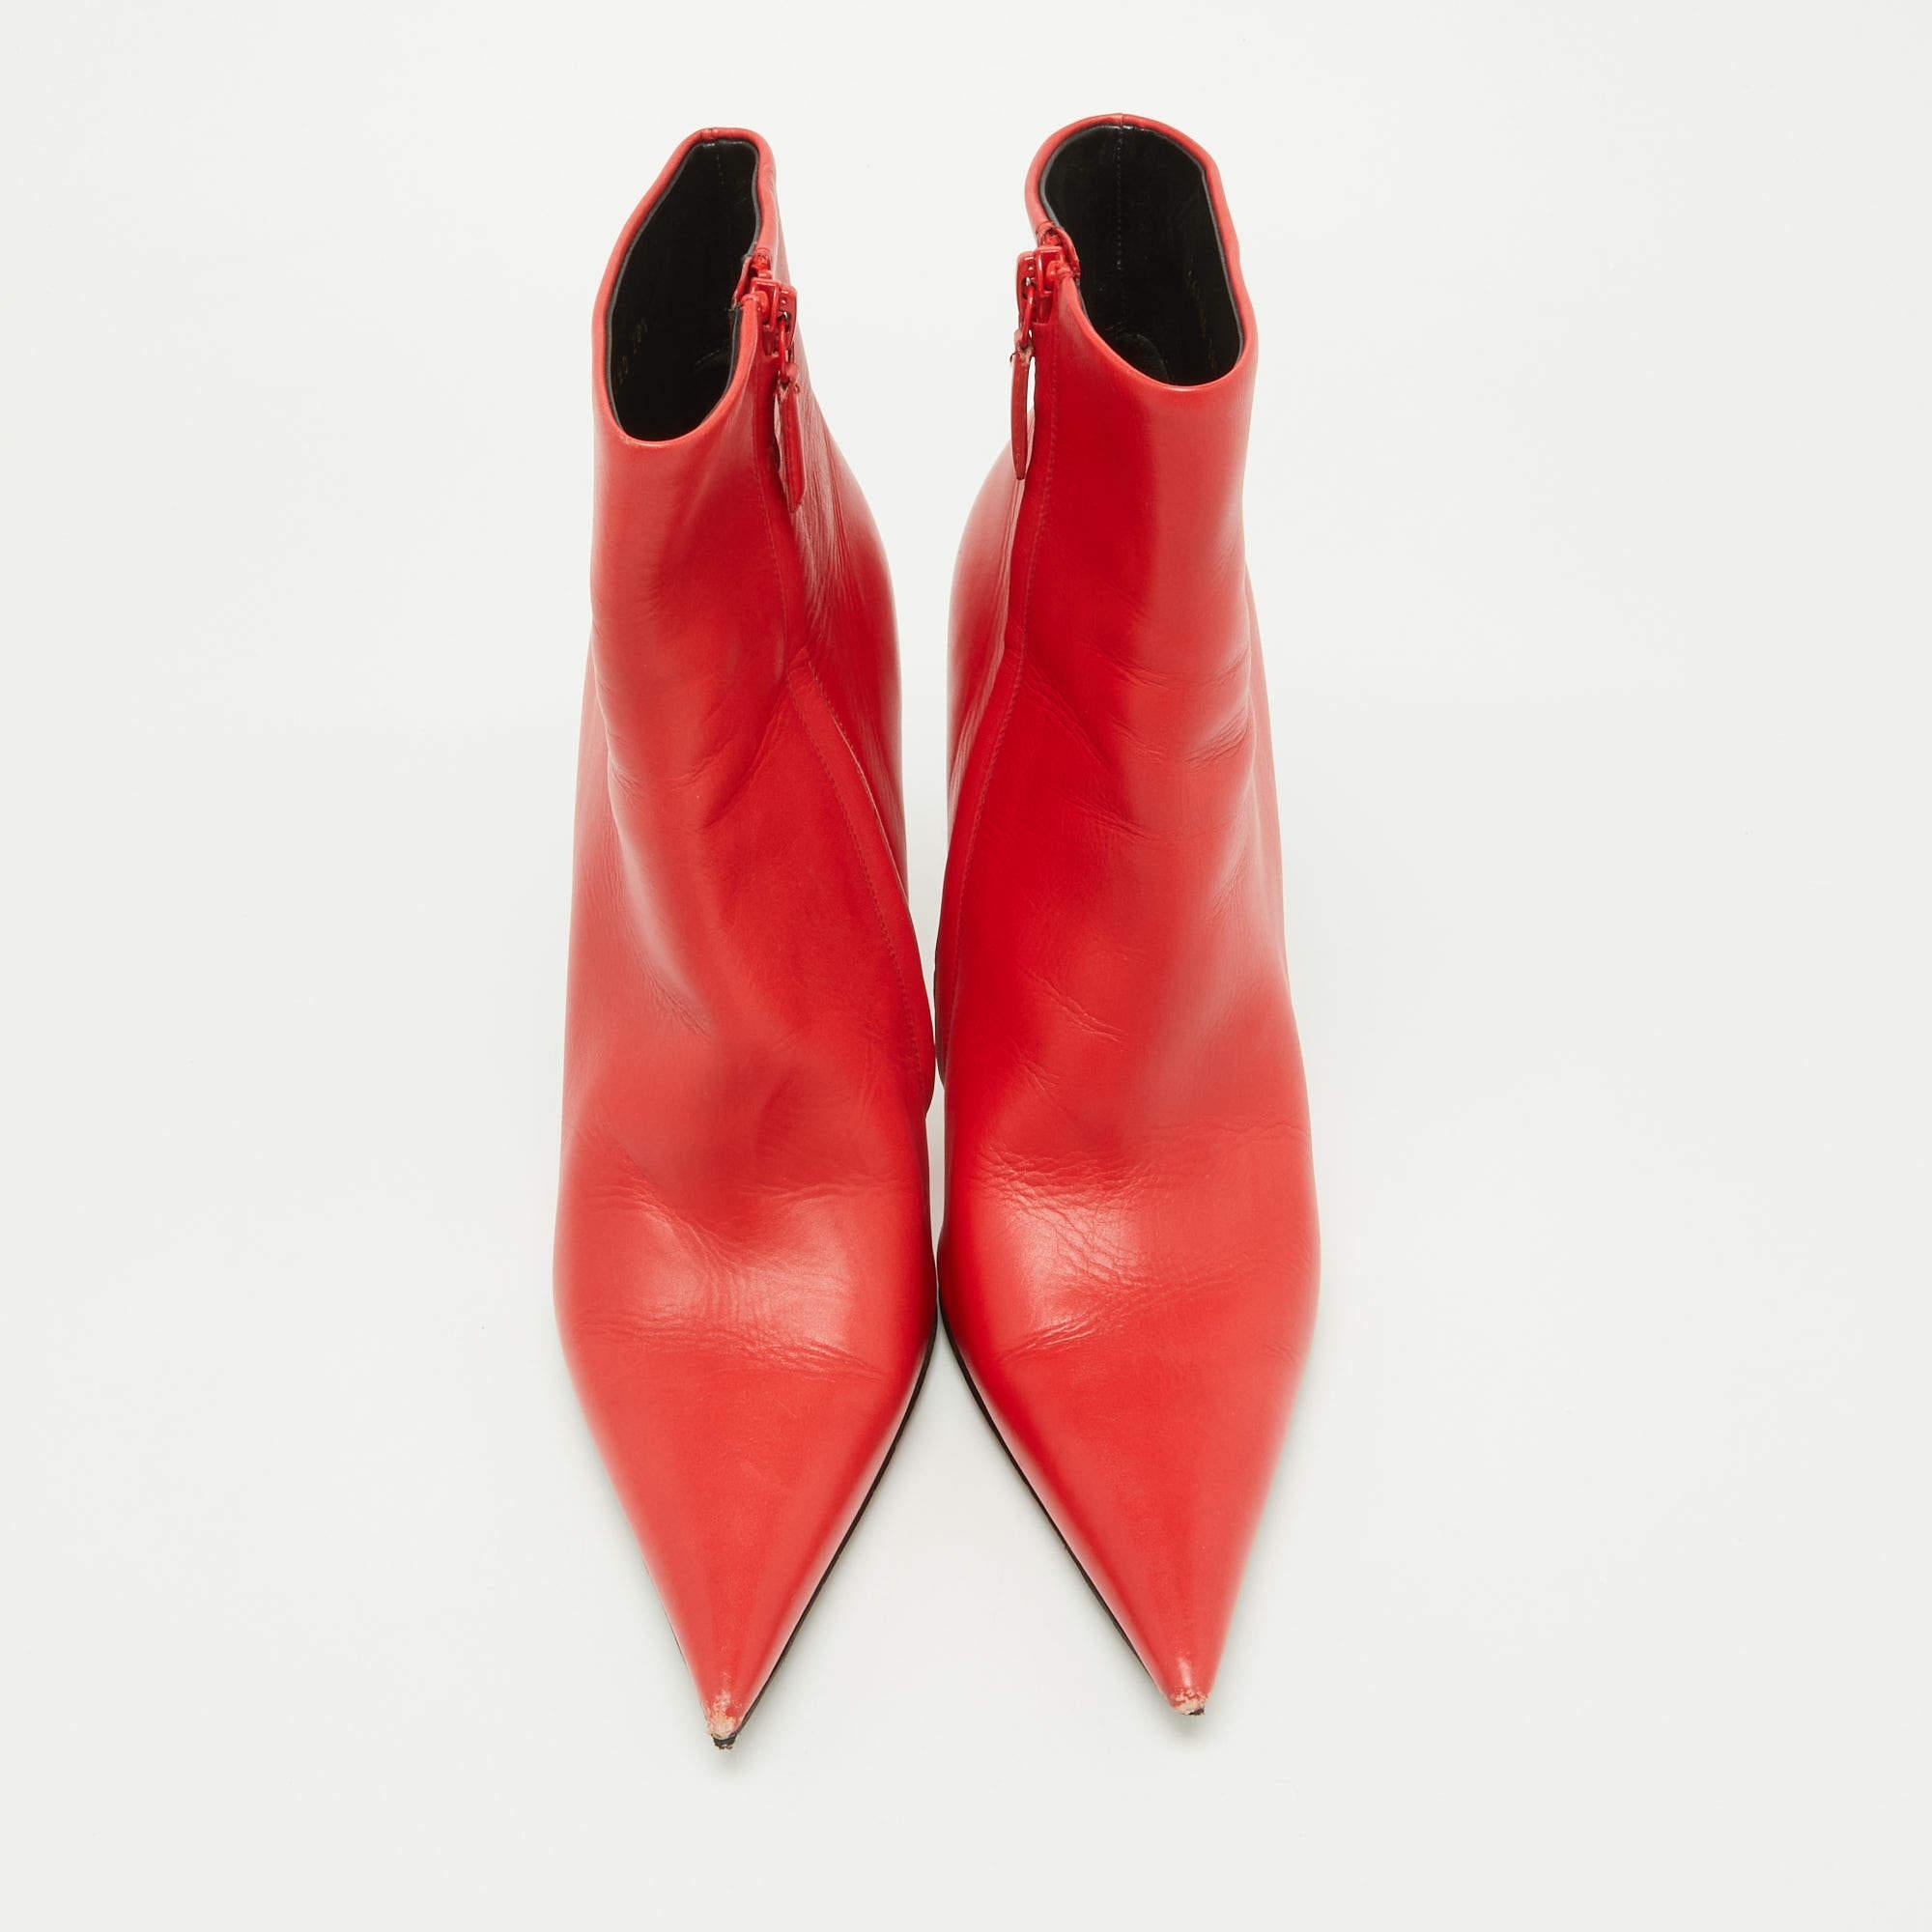 Balenciaga Red Leather Knife Ankle Booties Size 38.5 For Sale 2